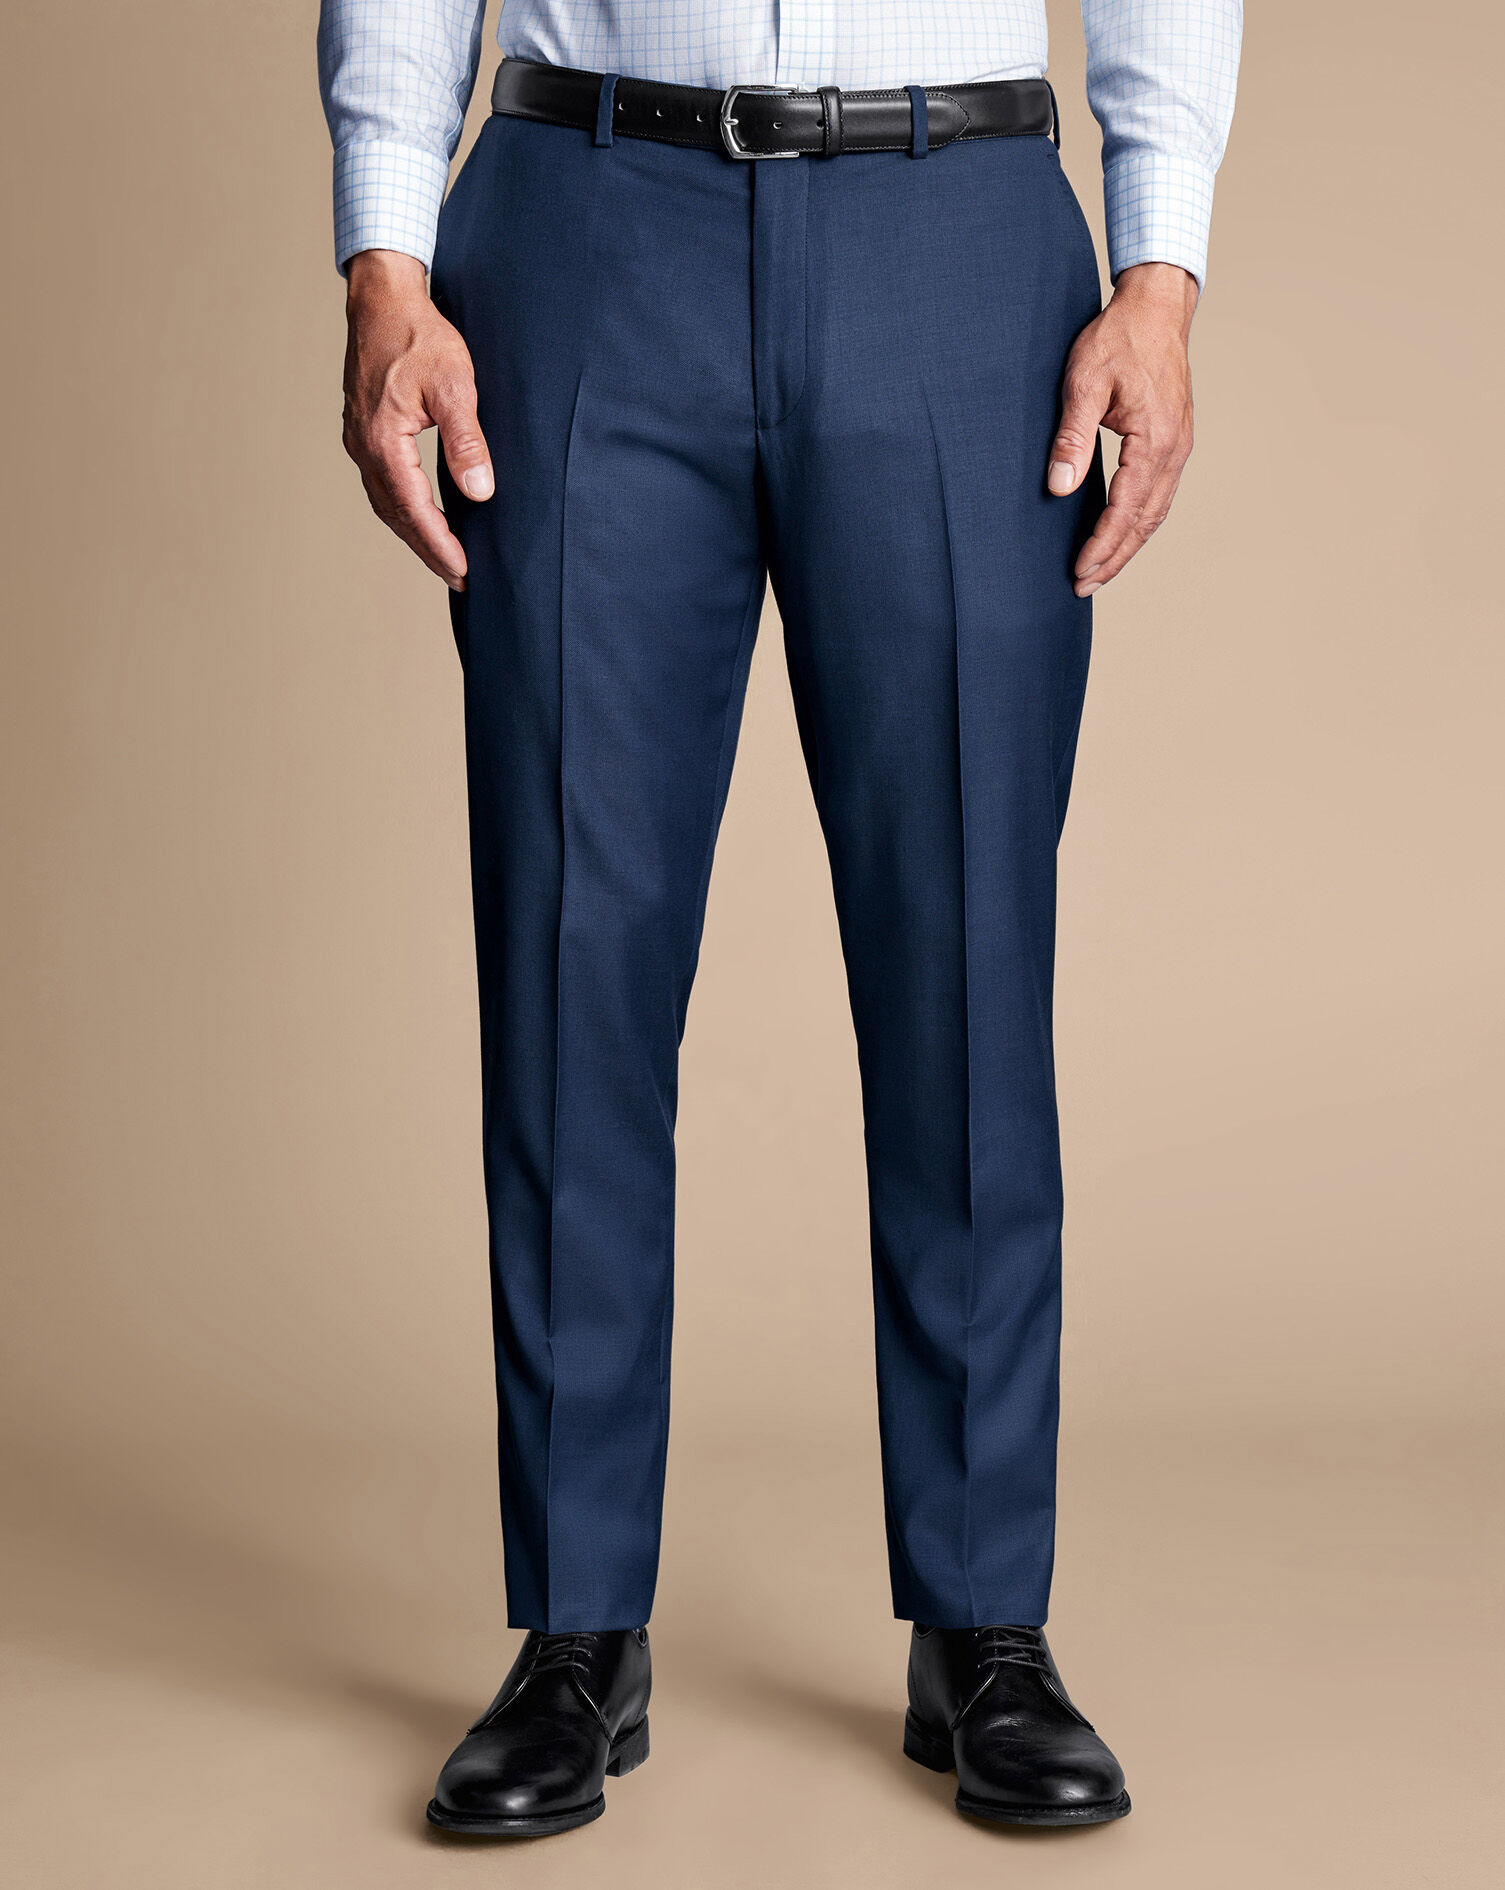 BASICS TAPERED FIT DEEP NAVY STRETCH TROUSER-19BTR42007 freeshipping -  BasicsLife